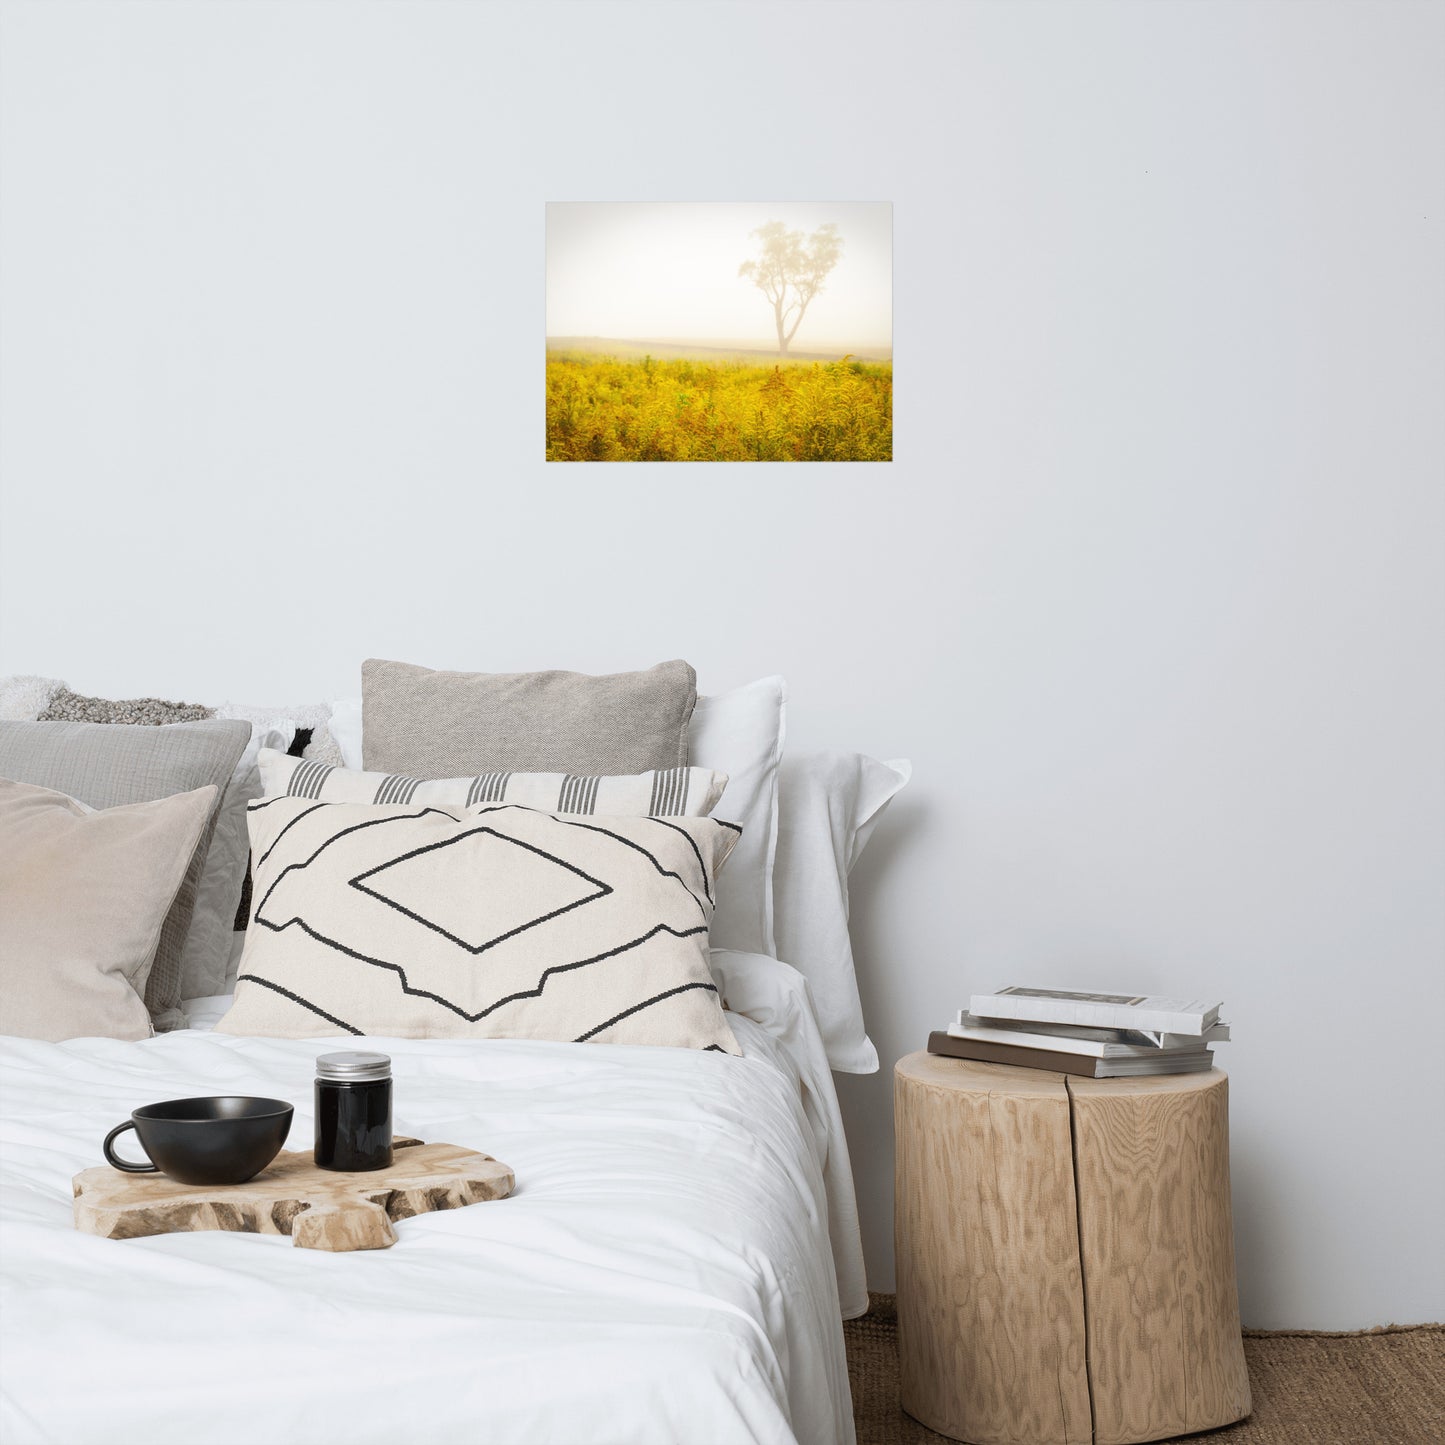 Dreams of Goldenrod and Fog Landscape Photo Loose Wall Art Prints